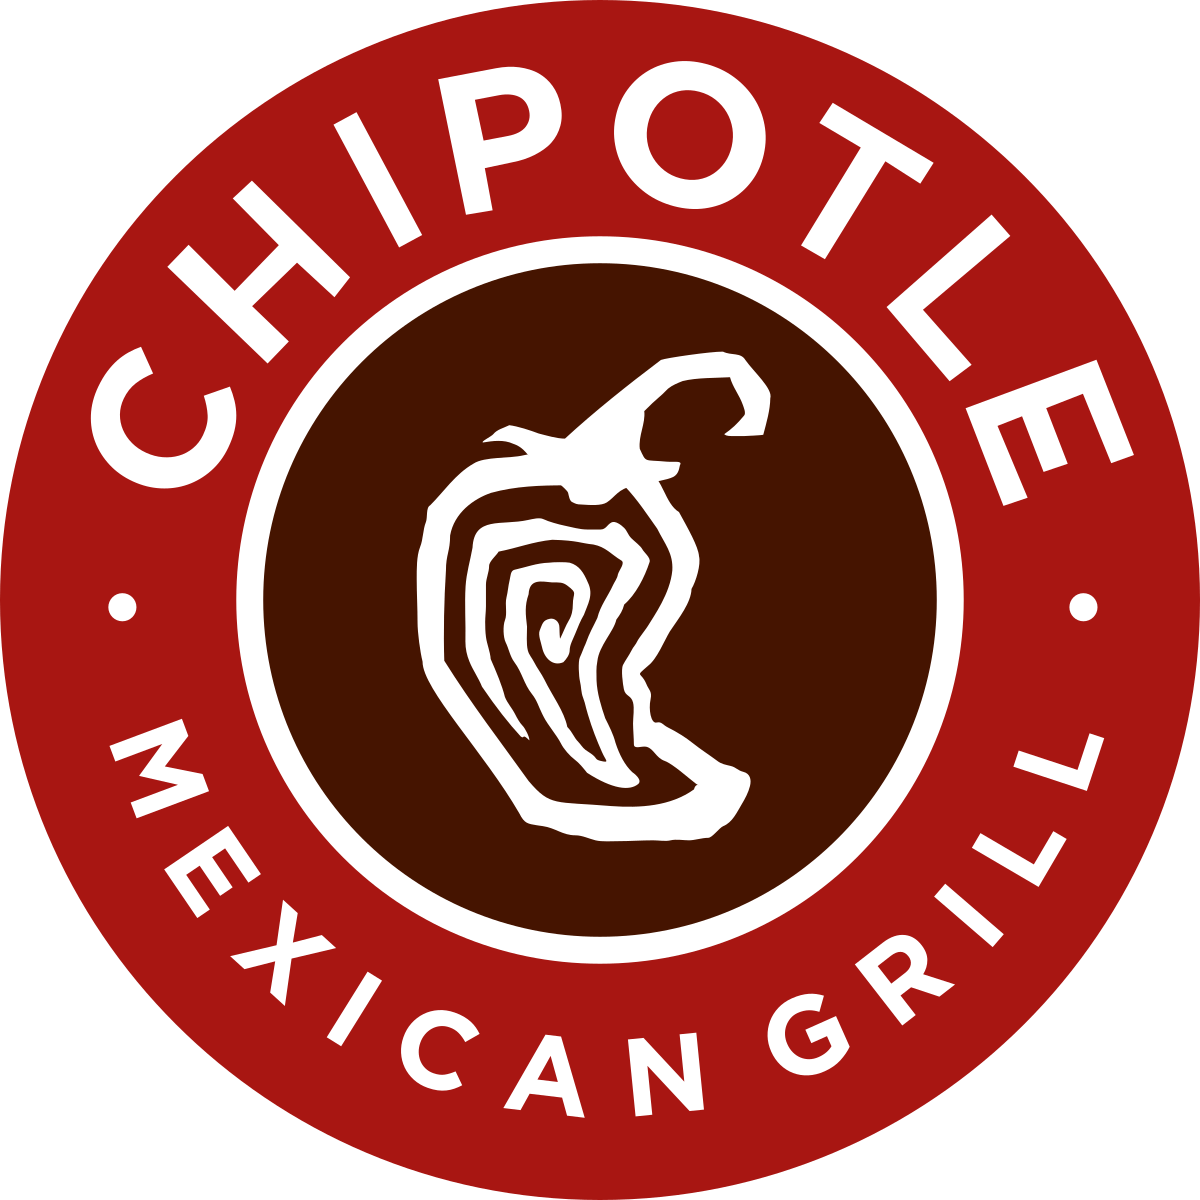 Resturants Red and Cream Circle Logo - Chipotle Mexican Grill